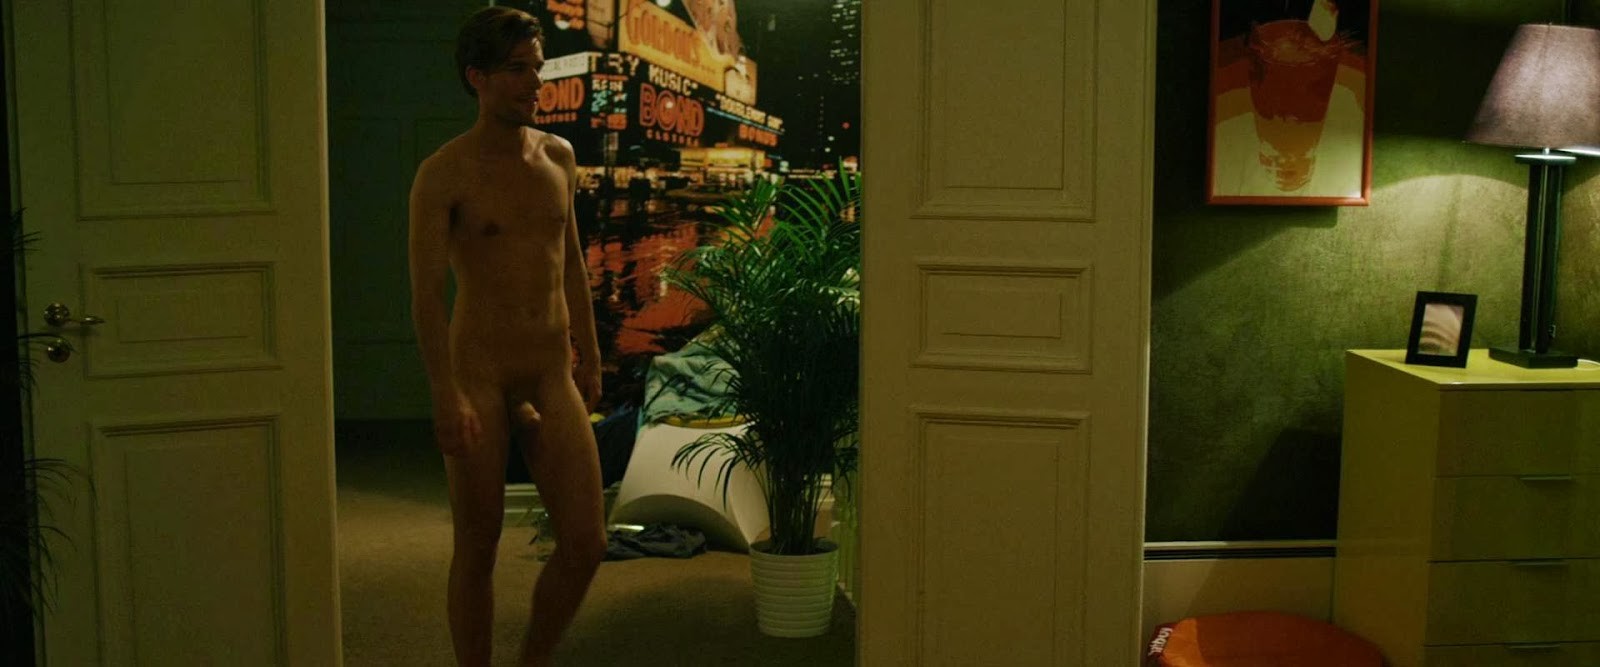 Anders Rydning nudo e in erezione in "Pornopung" (2013) 